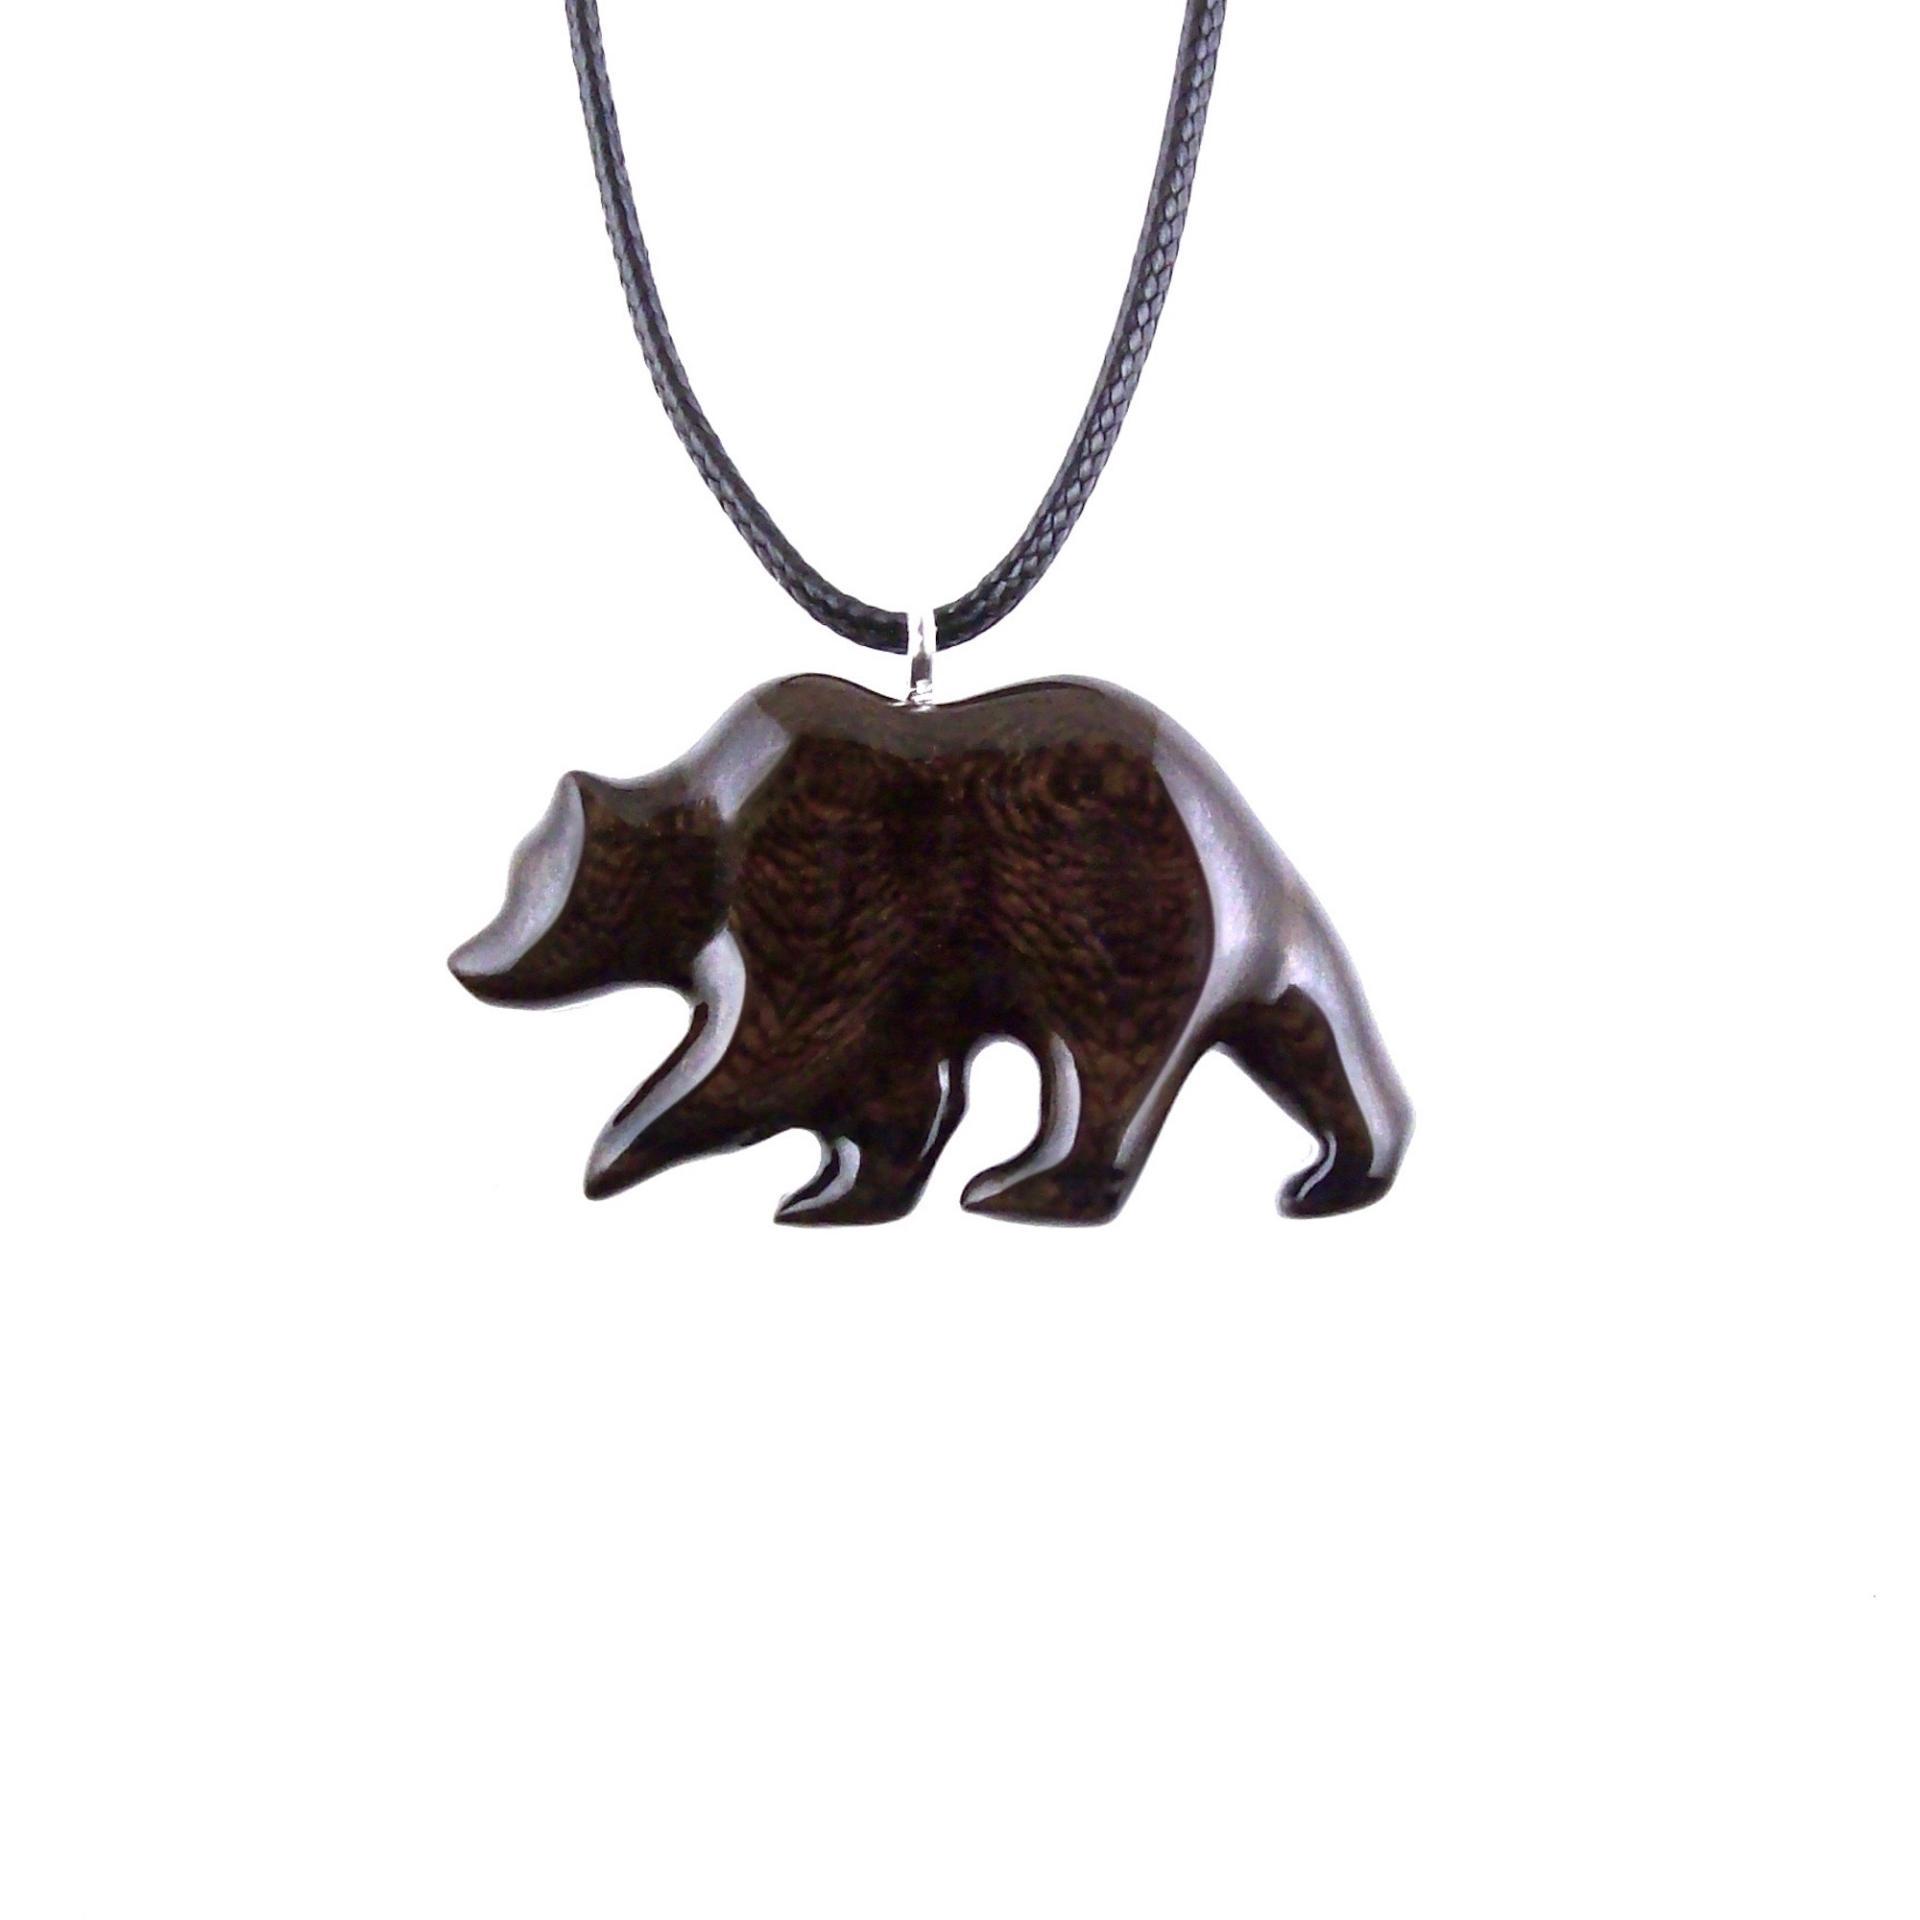 Amazon.com: Bear Necklace Pendant, Totem Spirit Animal Handmade Wooden  Grizzly Jewelry by GatewayAlpha Hand Carved in Honduran Rosewood Exotic  Wood : Handmade Products